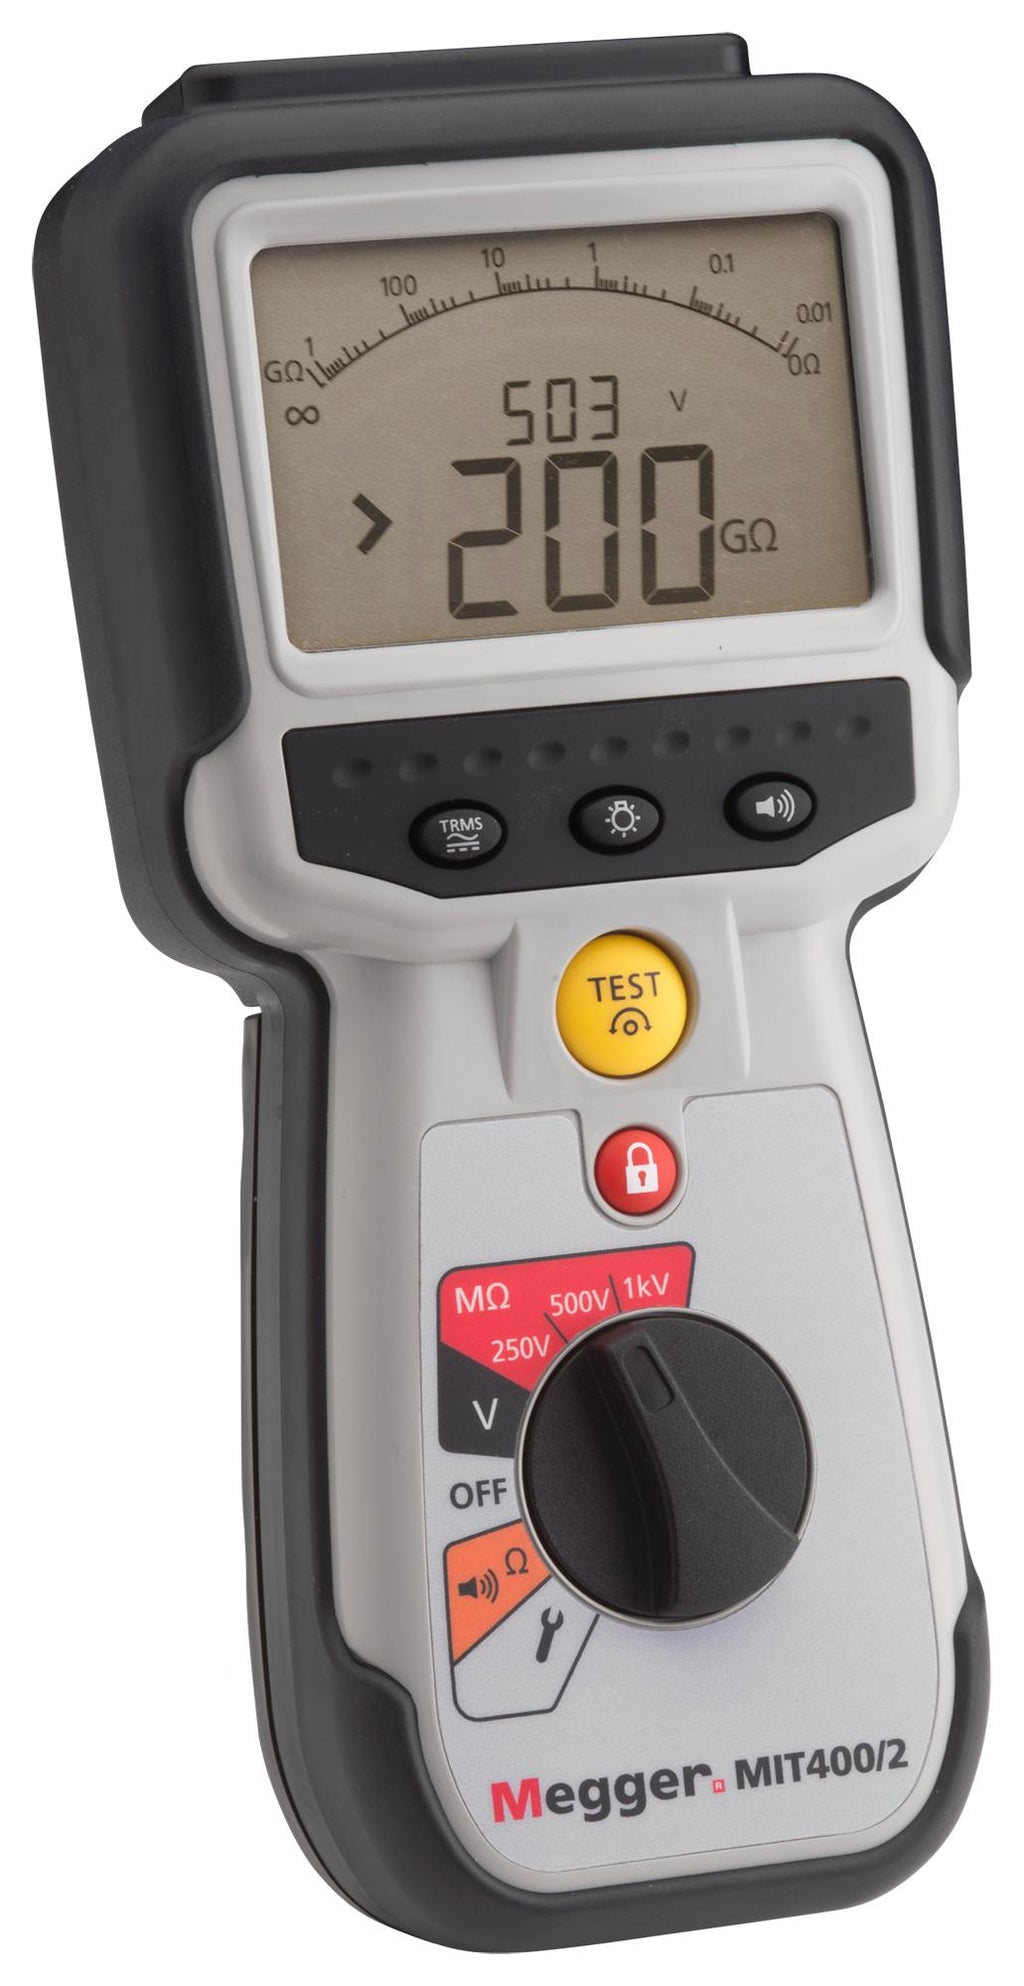 Megger MIT400/2 Series Insulation Testers